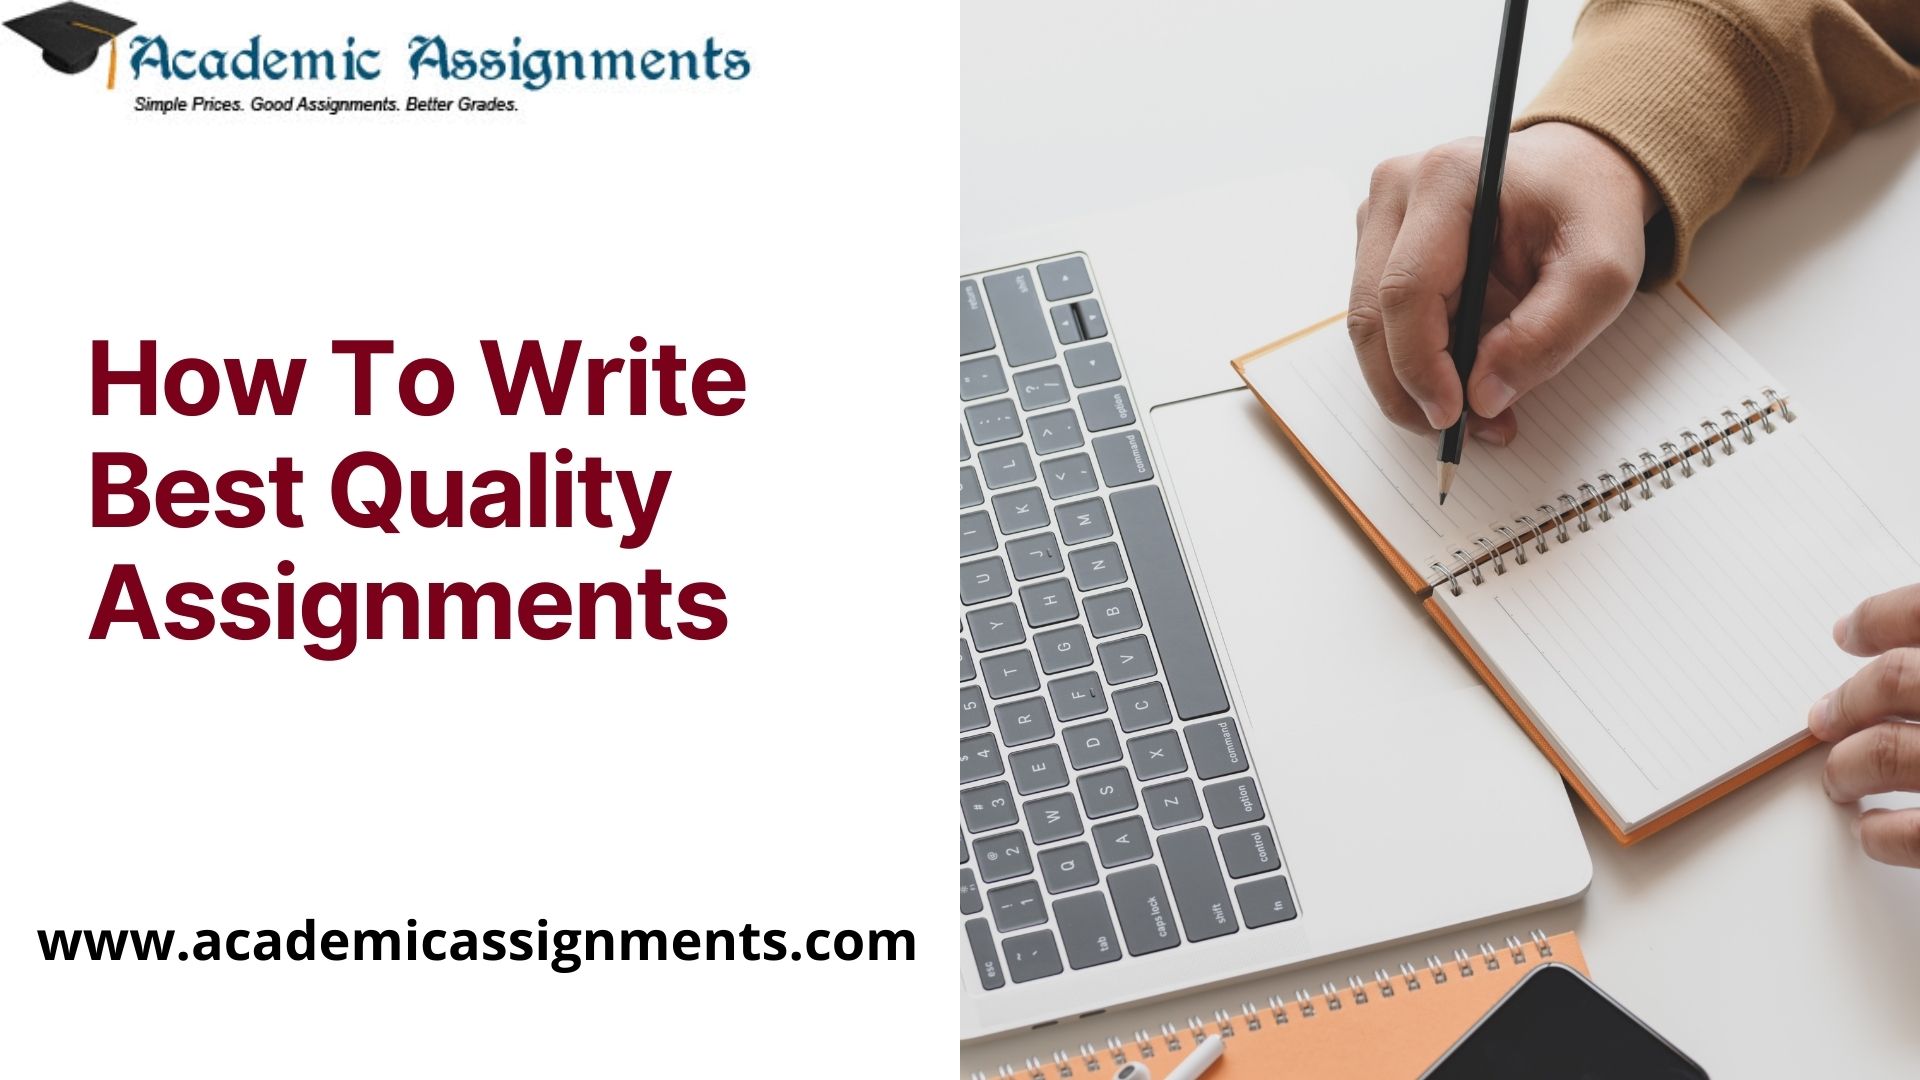 How To Write Best Quality Assignments